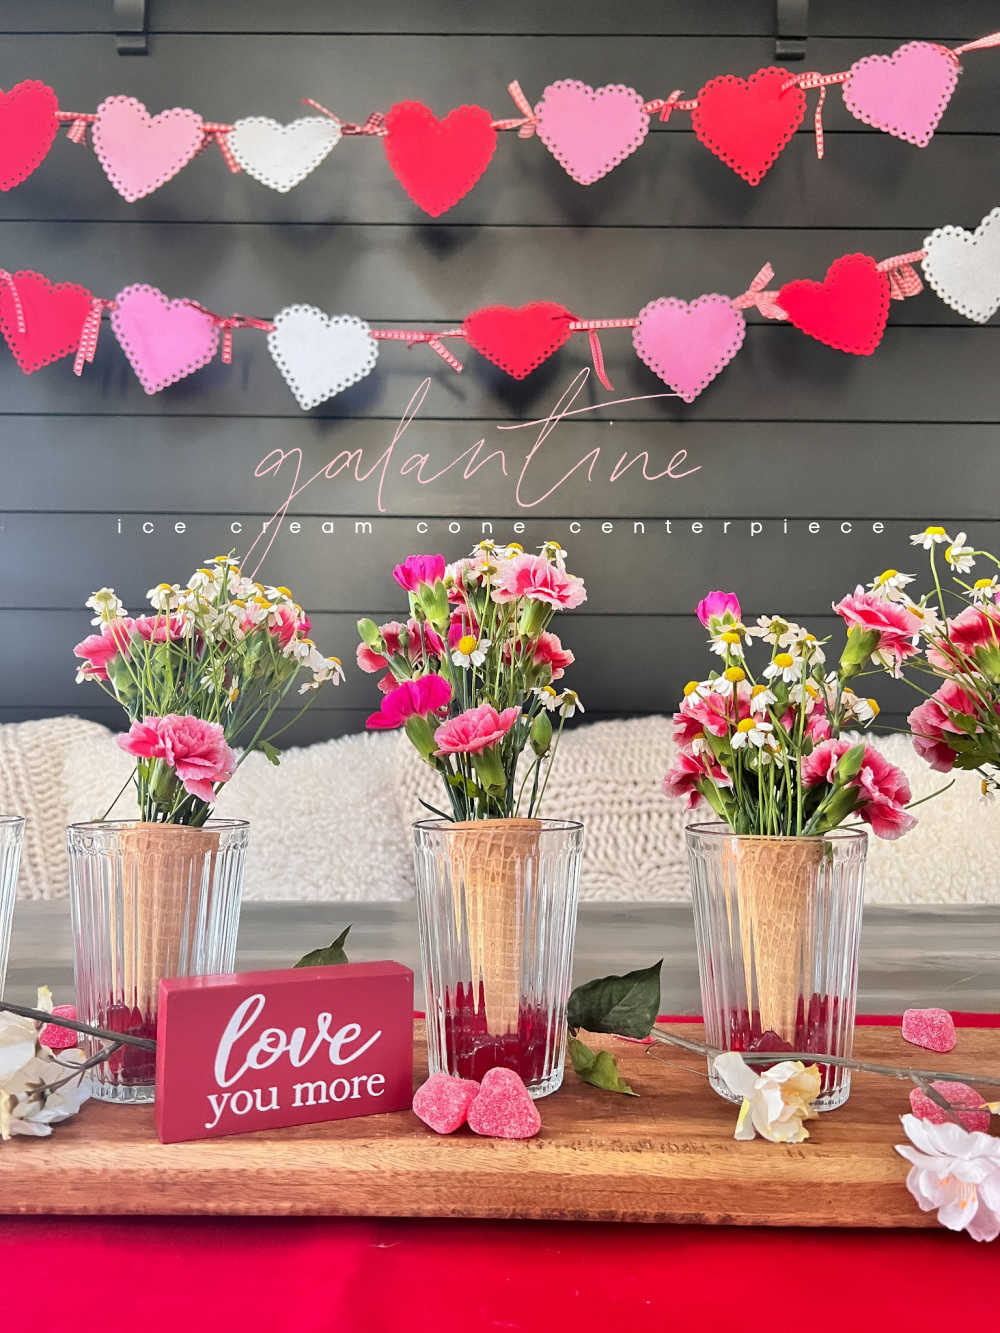 Galantine's Ice Cream Cone Centerpiece! Use grocery store flowers and ice cream cones to create the perfect Valentine or Galentine centerpiece! 